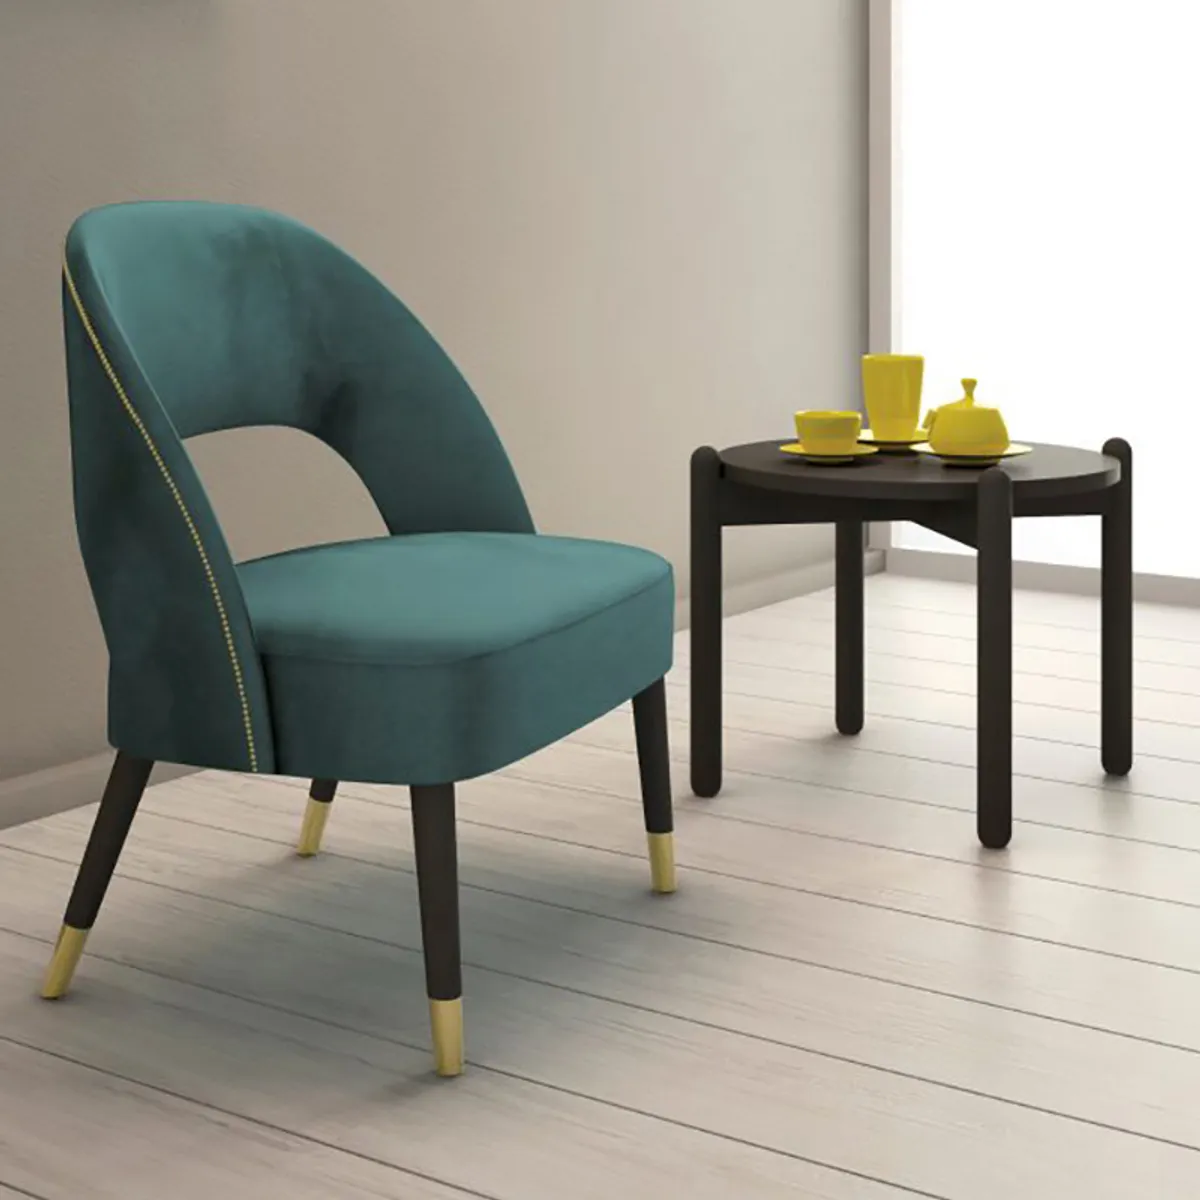 emilia-lounge-chair-upholstered-chair-with-wooden-legs-and-metal-floor-savers